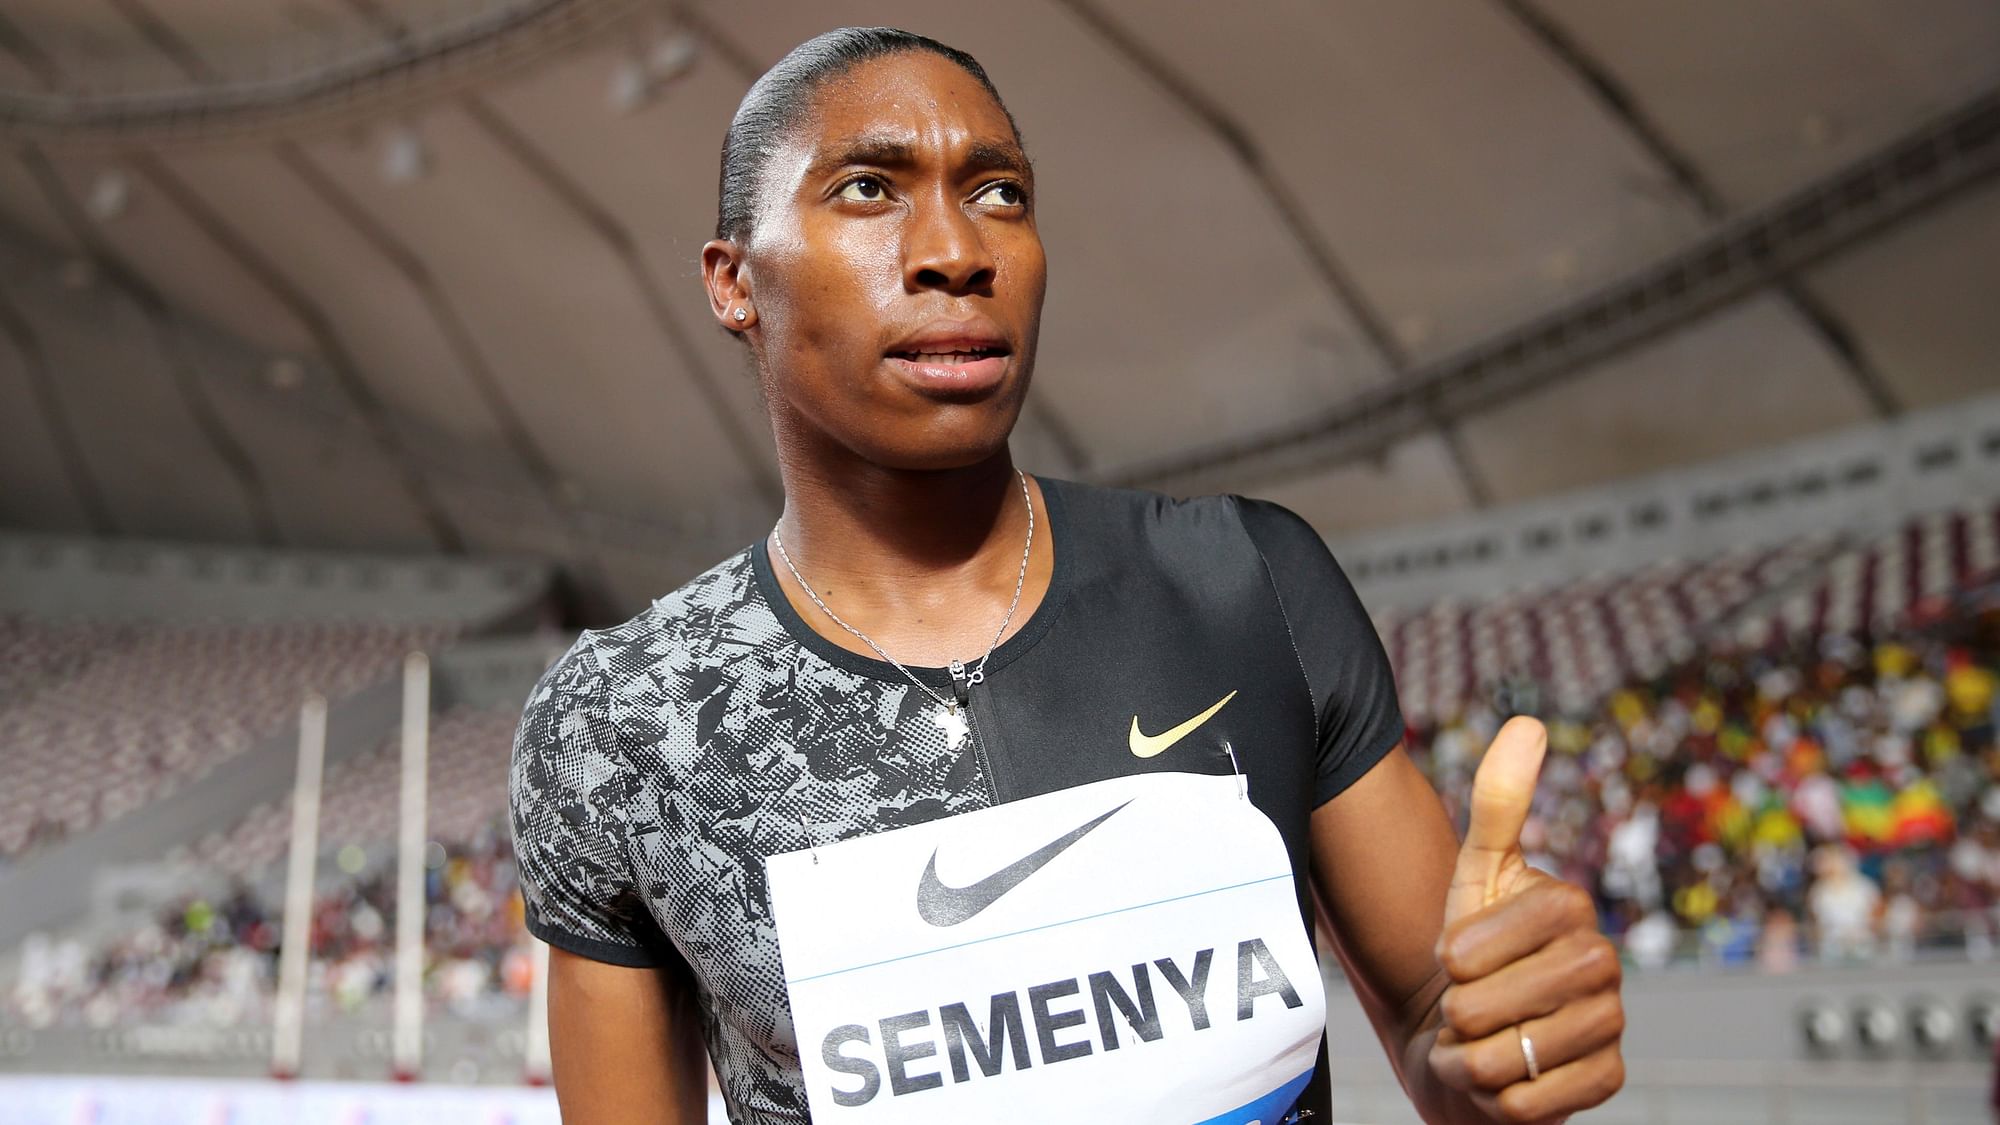 South Africa’s Caster Semenya celebrates after crossing the line to win the gold in the women’s 800-meter final during the Diamond League in Doha, Qatar, Friday, May 3, 2019.&nbsp;